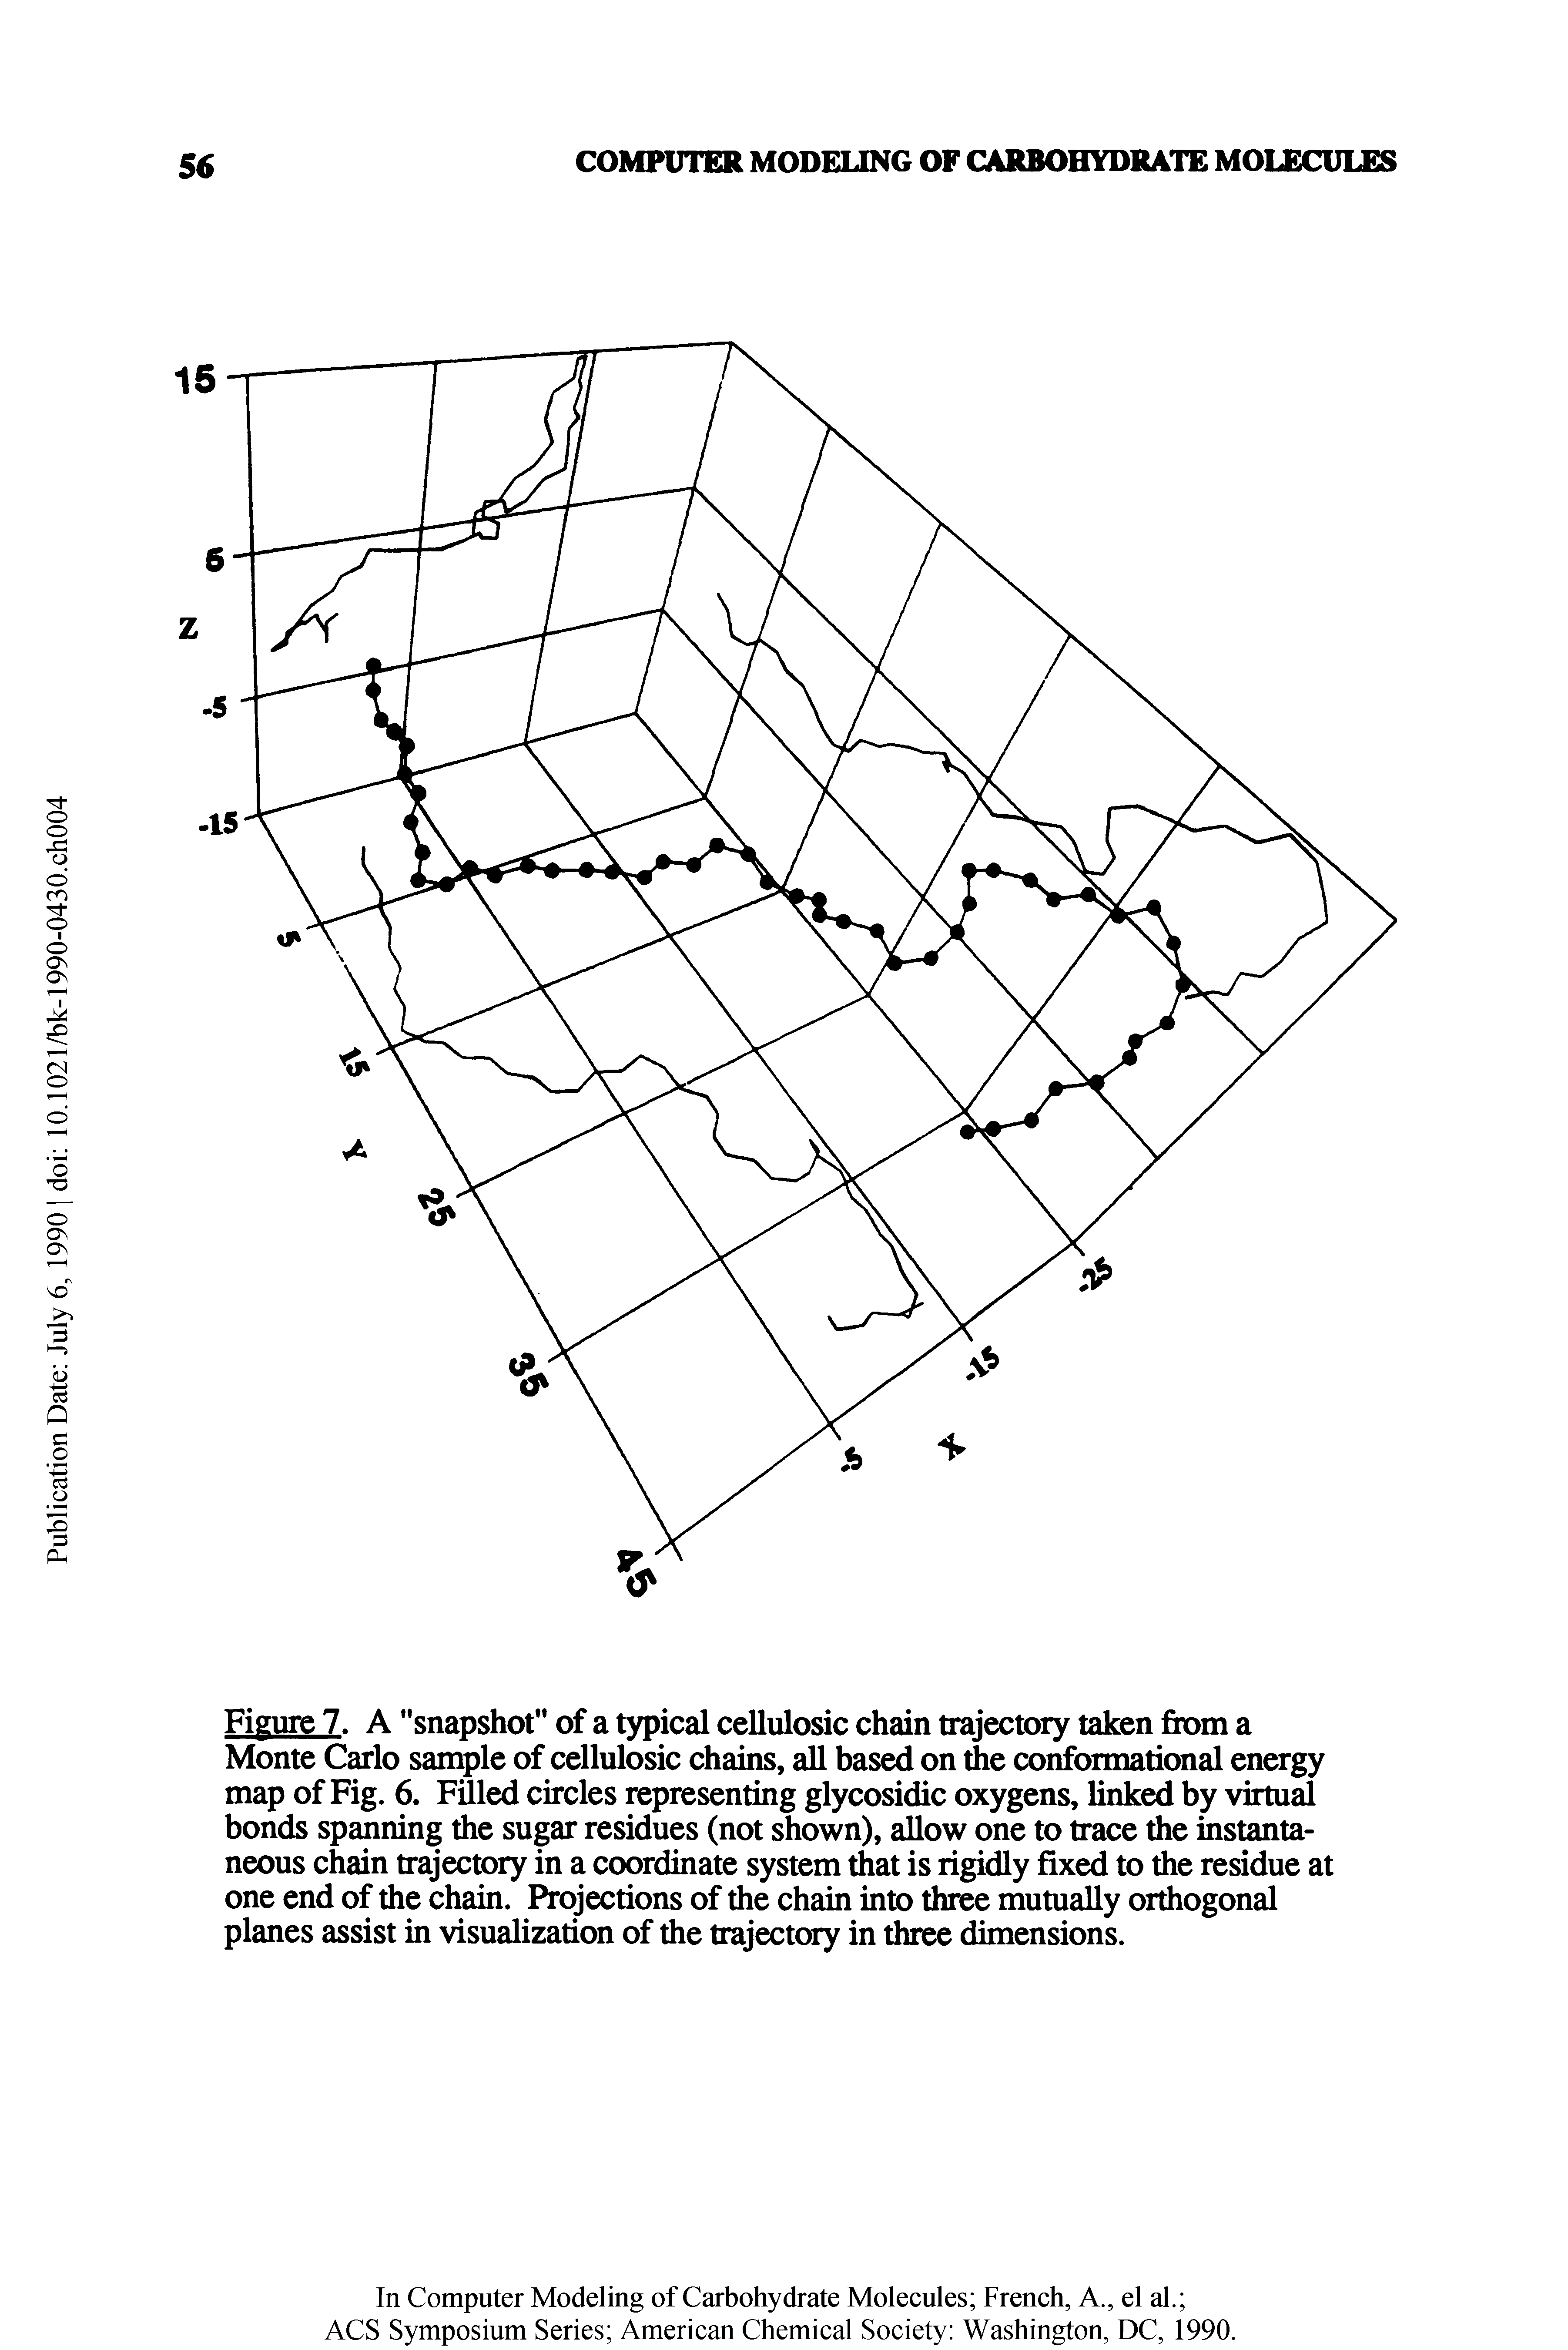 Figure 7. A "snapshot" of a typical cellulosic chain trajectory taken from a Monte Carlo sample of cellulosic chains, all based on die conformational energy map of Fig. 6. Filled circles representing glycosidic oxygens, linked by virtud bonds spanning the sugar residues (not shown), allow one to trace the instantaneous chain trajectory in a coordinate system that is rigidly fixed to the residue at one end of the chain. Projections of the chain into three mutually orthogonal planes assist in visualization of the trajectory in three dimensions.